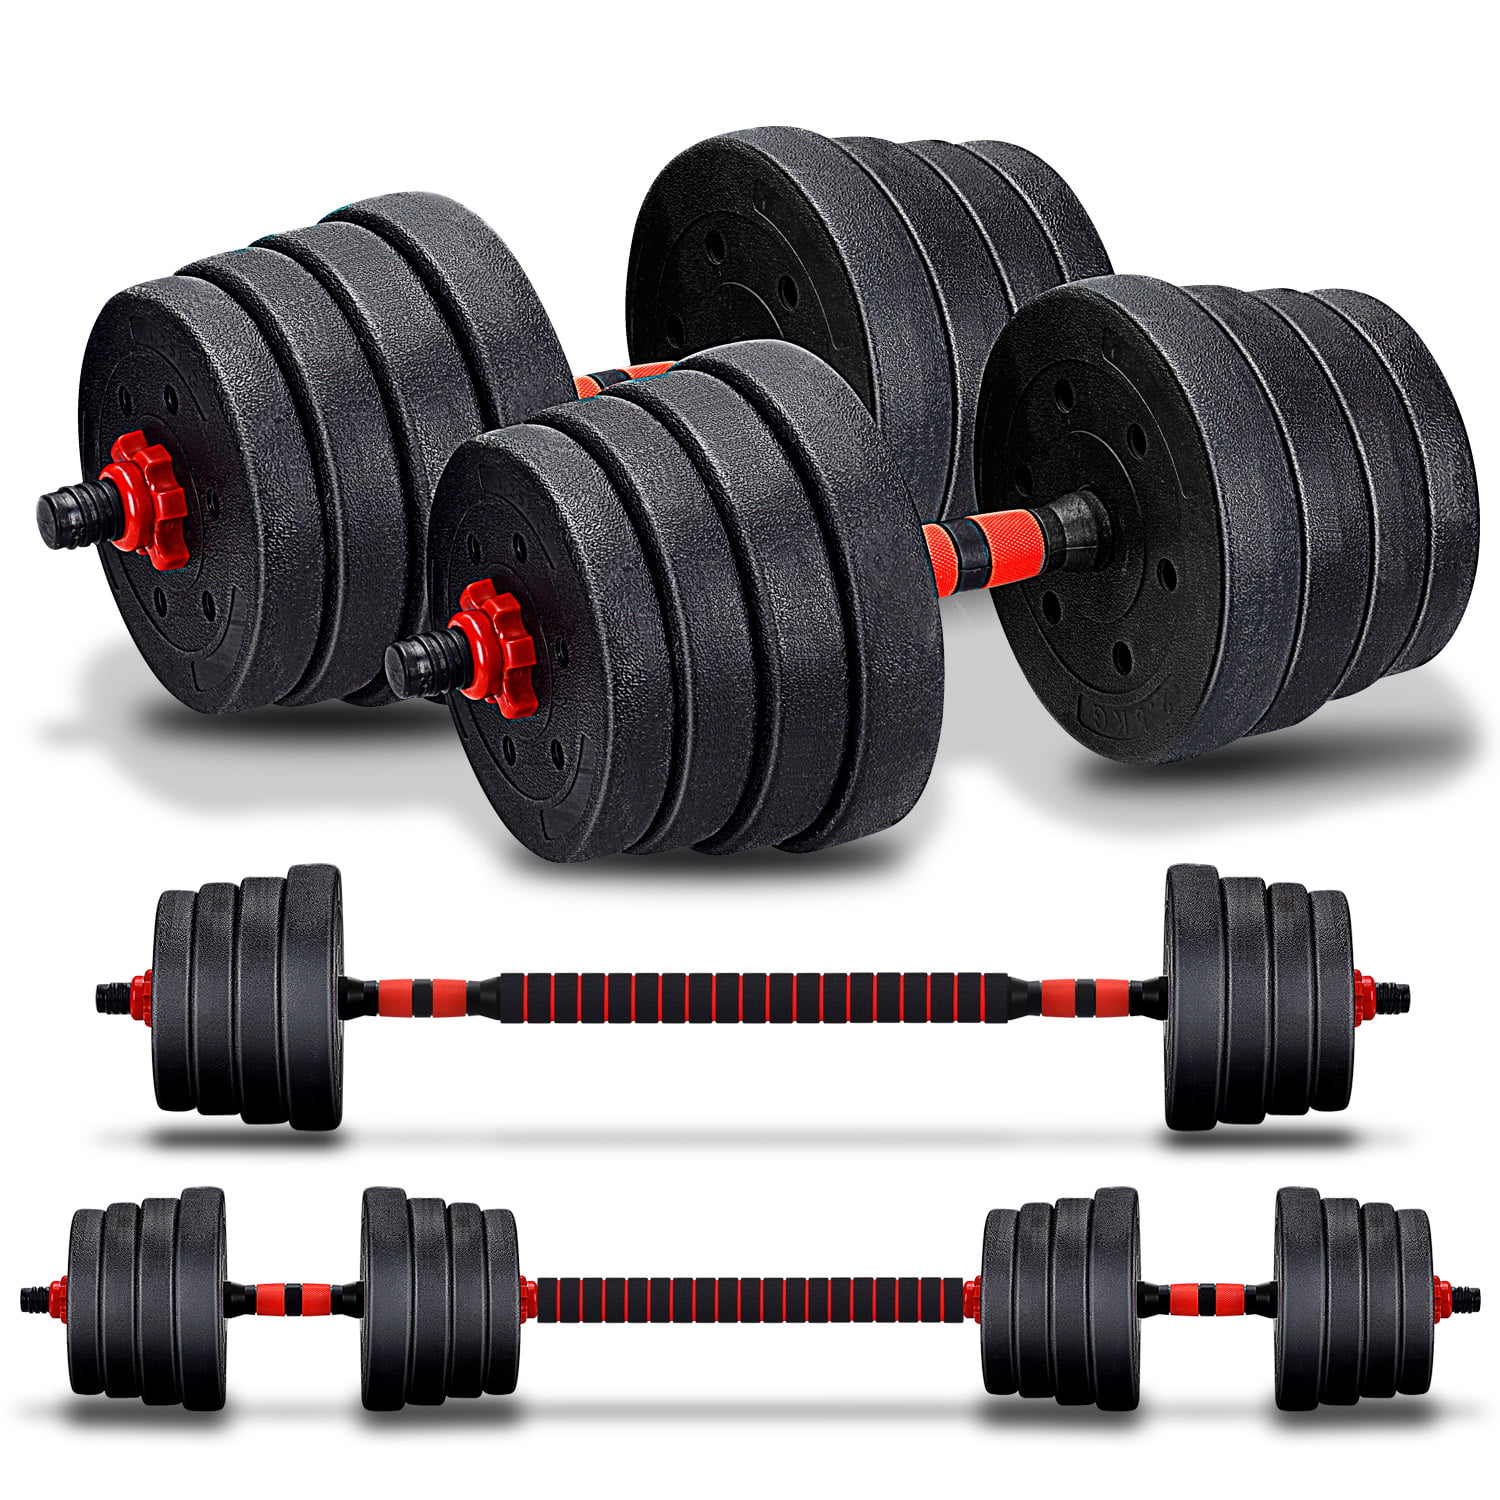 Totall 66 LB Weight Dumbbell Set Adjustable Cap Gym Barbell Plates Body Workout